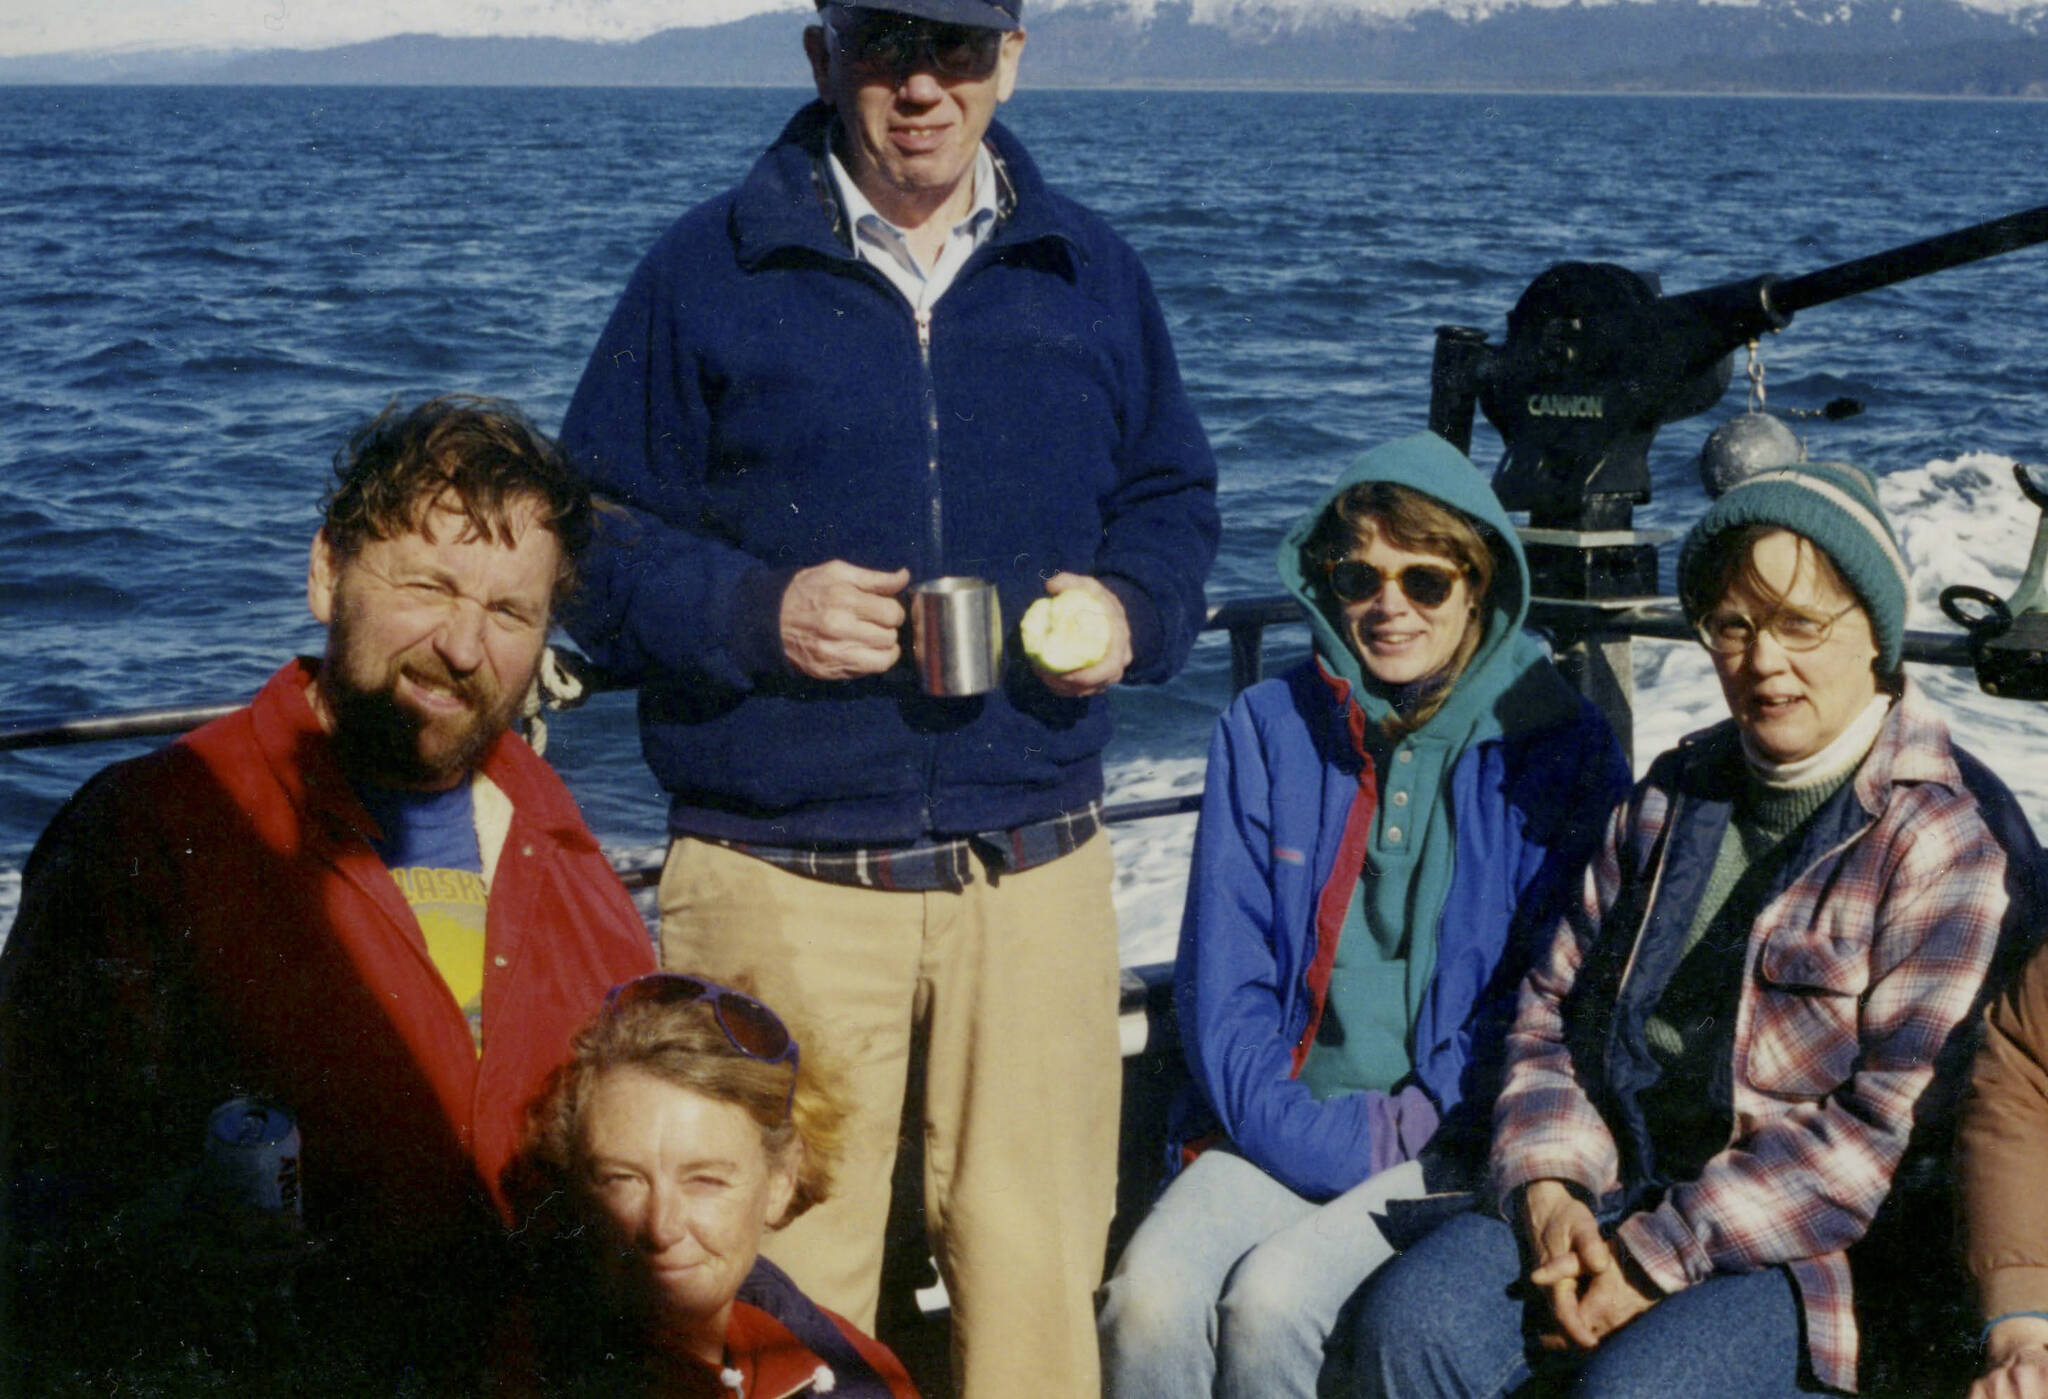 At left are Roger and Kathy Hernsteen, “Mr. and Mrs. Crab,” who lead onboard oceanography progrms. With them are Mitch Mitchell, Lisa Ellington and former CACS Director Janet Middleton. (Photo courtesy CACS)